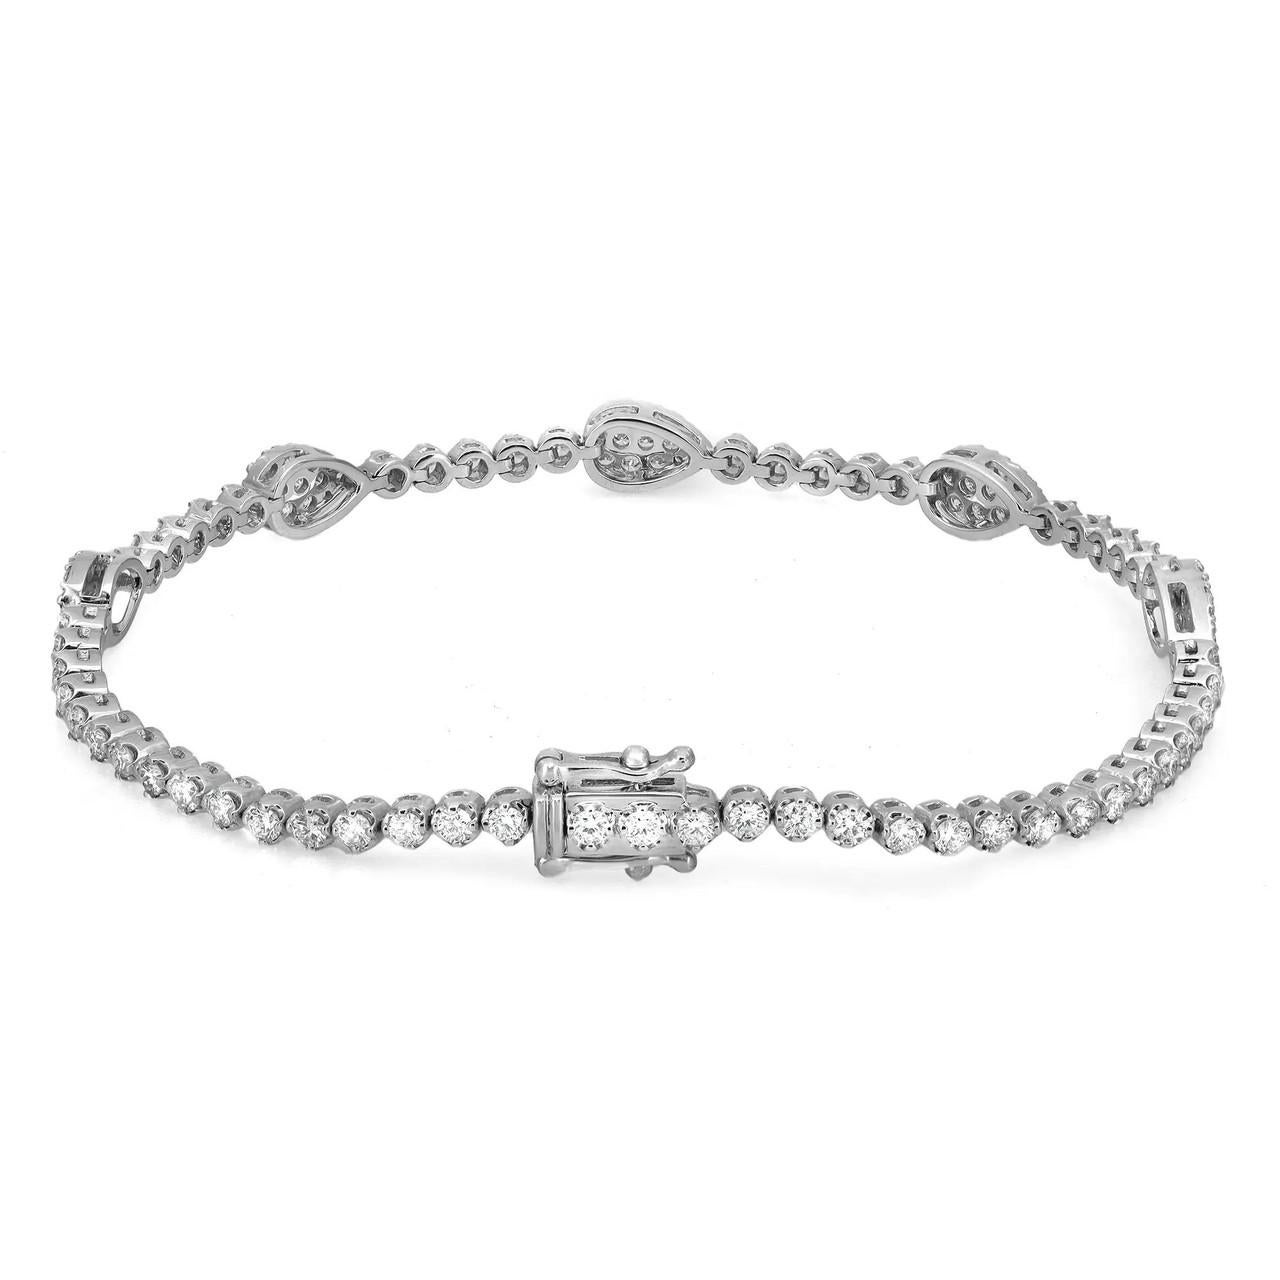 Elevate your elegance with our exquisitely crafted tennis bracelet. Prong-set round brilliant cut diamonds, accented by five pear-shaped designs studded with pave-set round cut diamonds, adorn this stunning piece, crafted in lustrous 18K white gold.